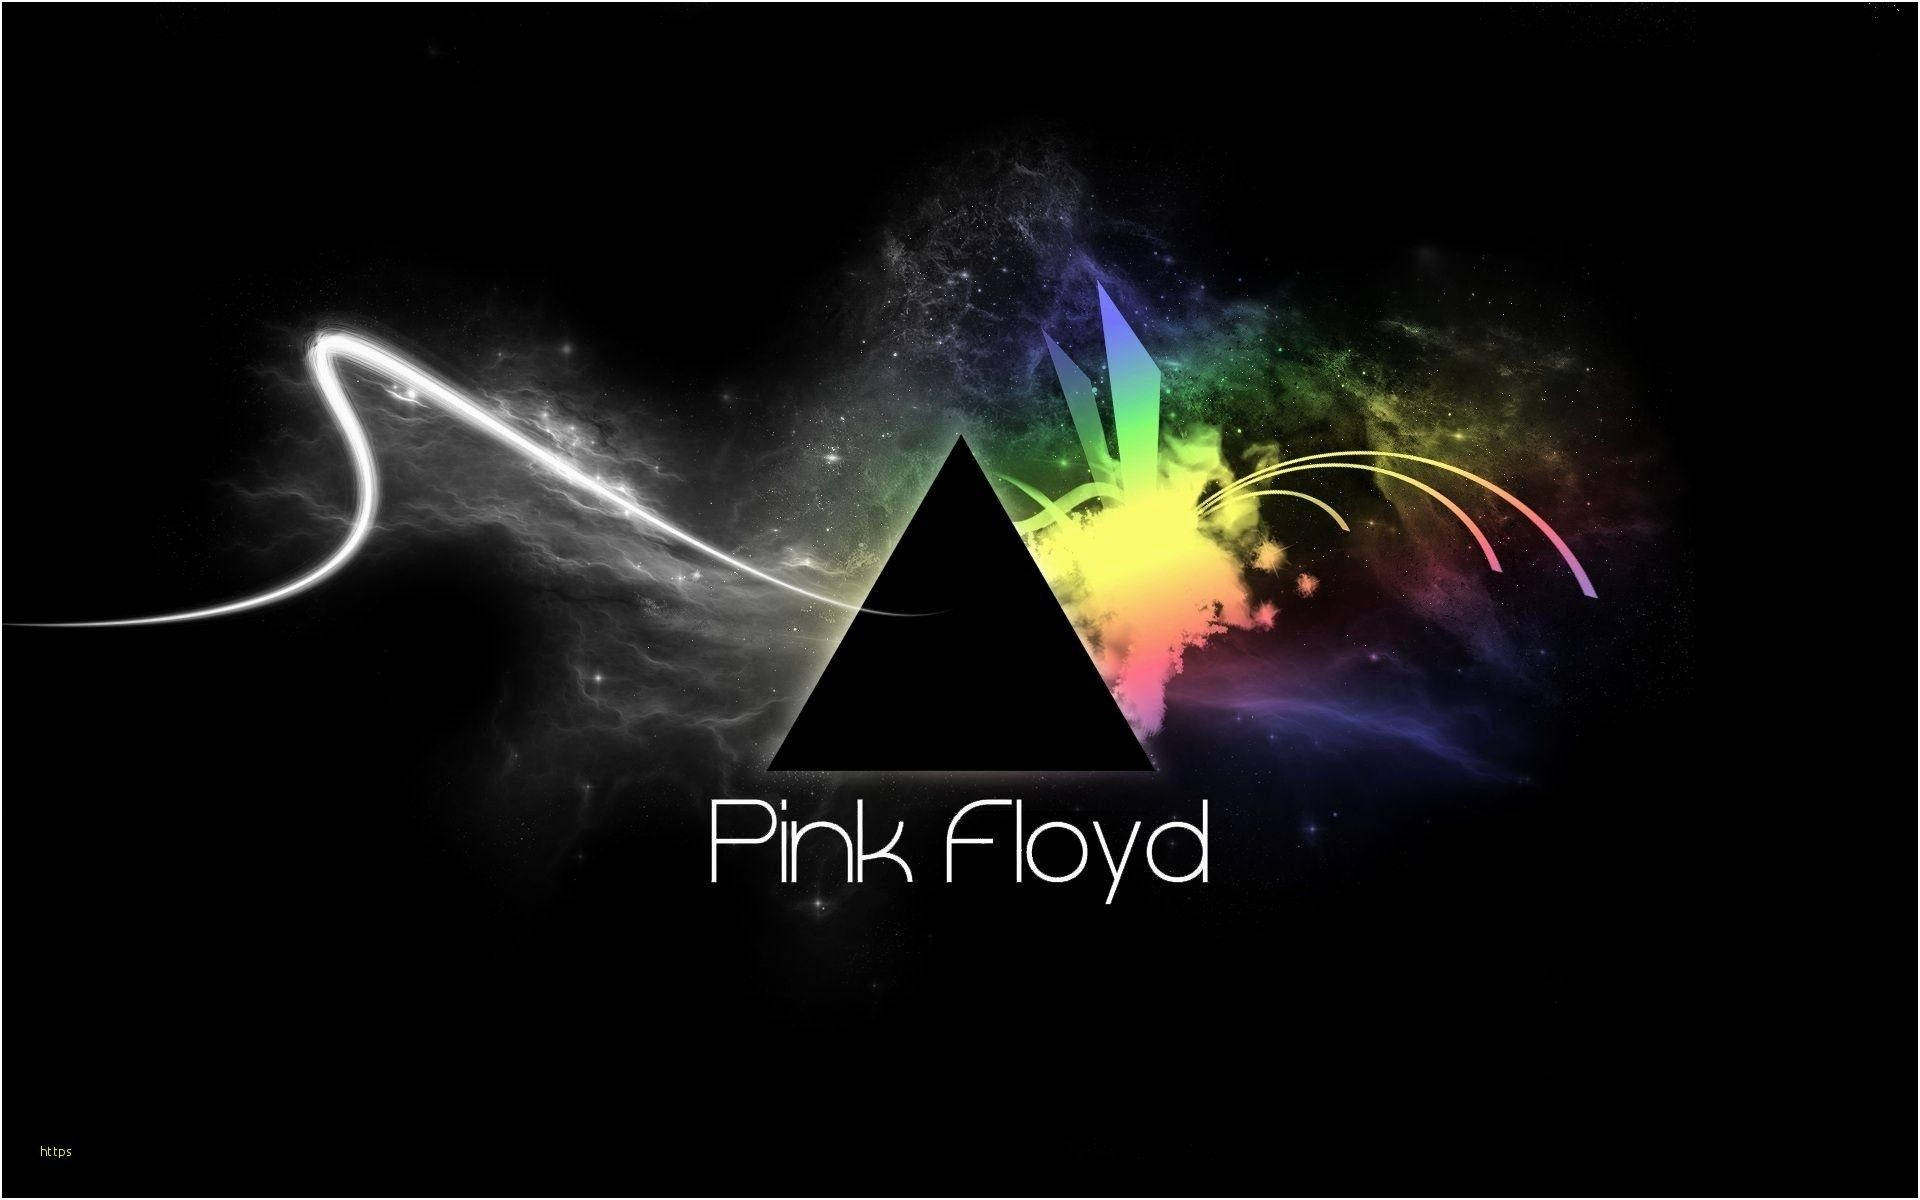 Cruise Through Space with Pink Floyd's Latest Album Wallpaper